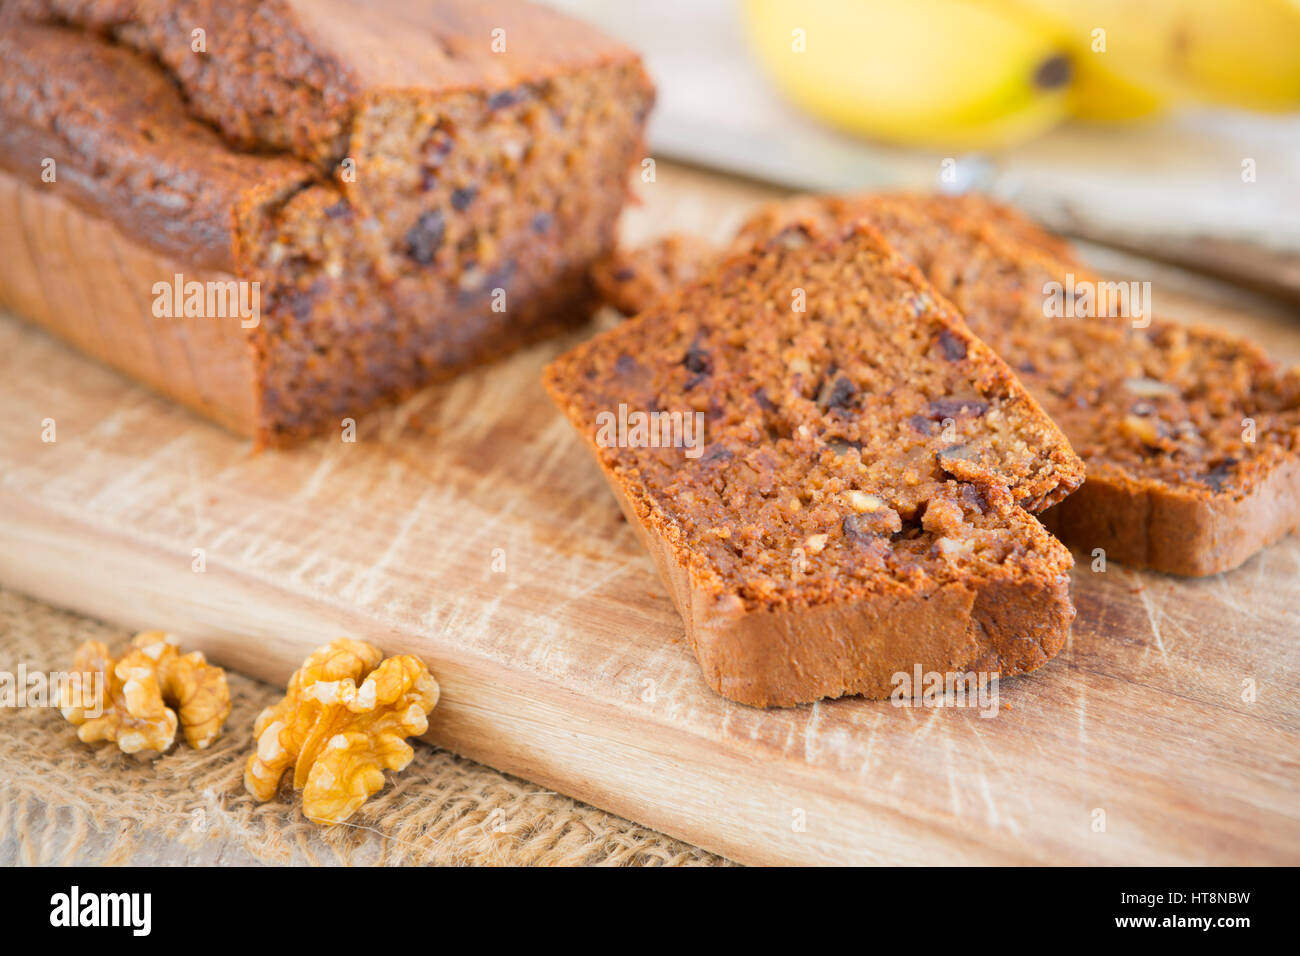 Homemade banana bread with walnuts and dates on a rustic table. Stock Photo